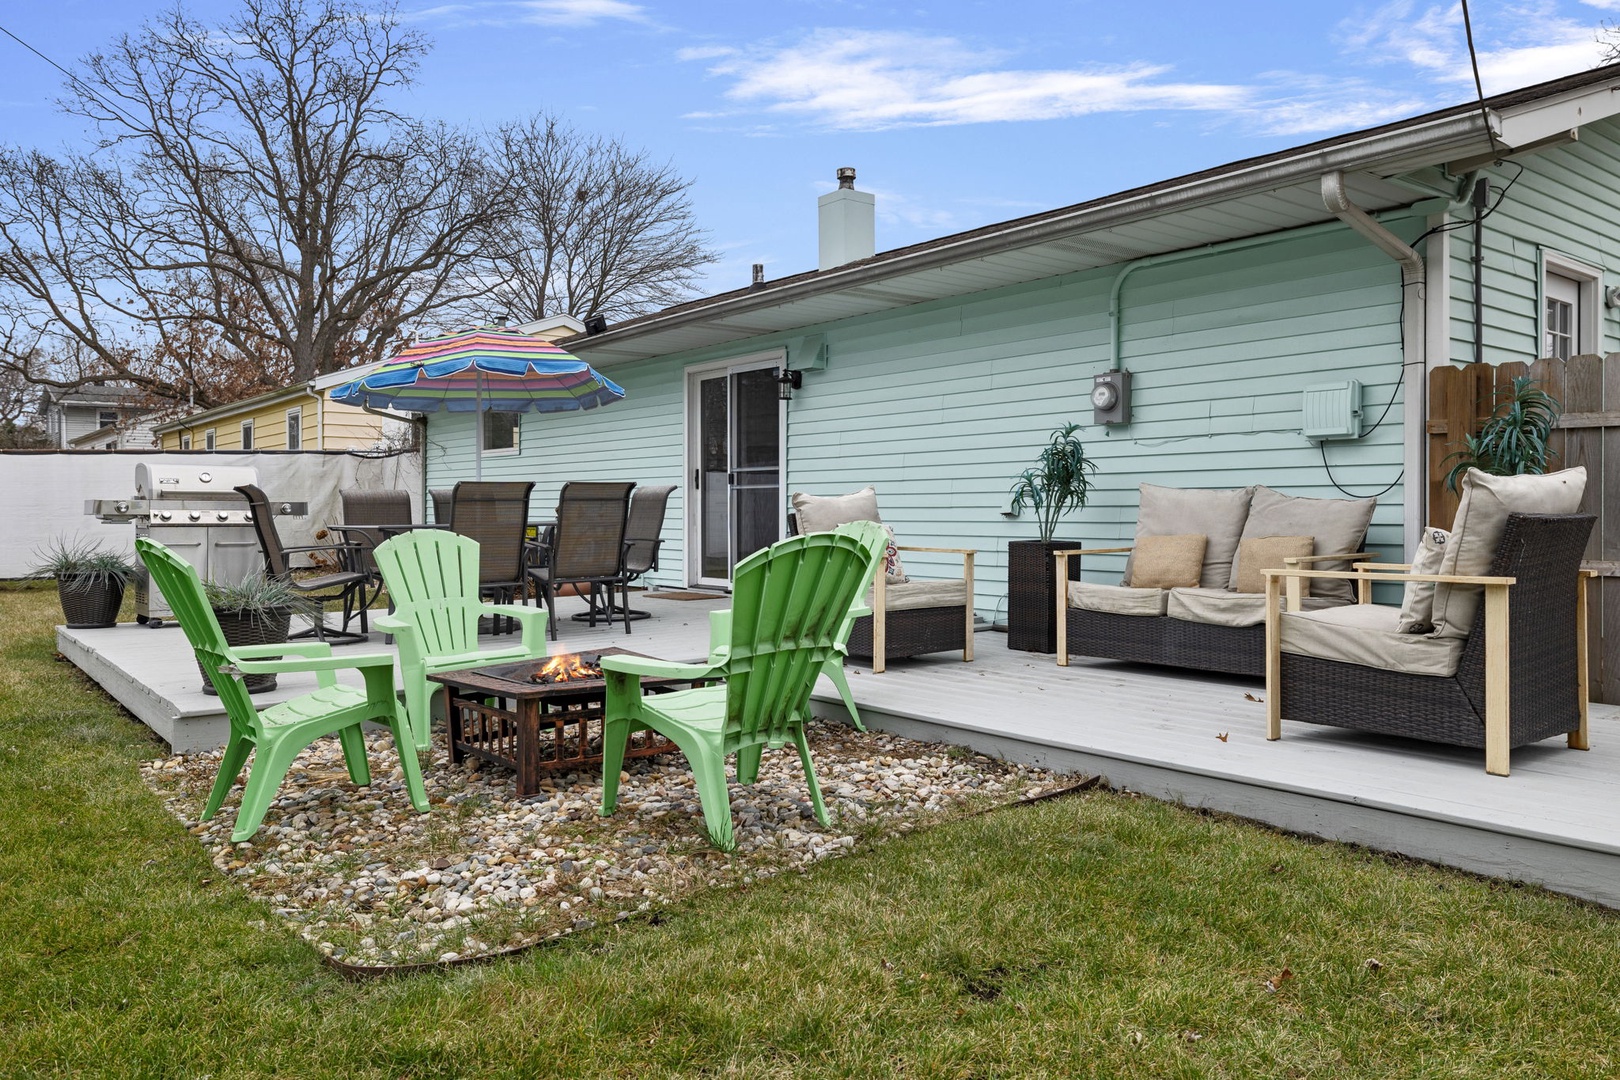 The backyard is a perfect place for you and your guests to hang out together.